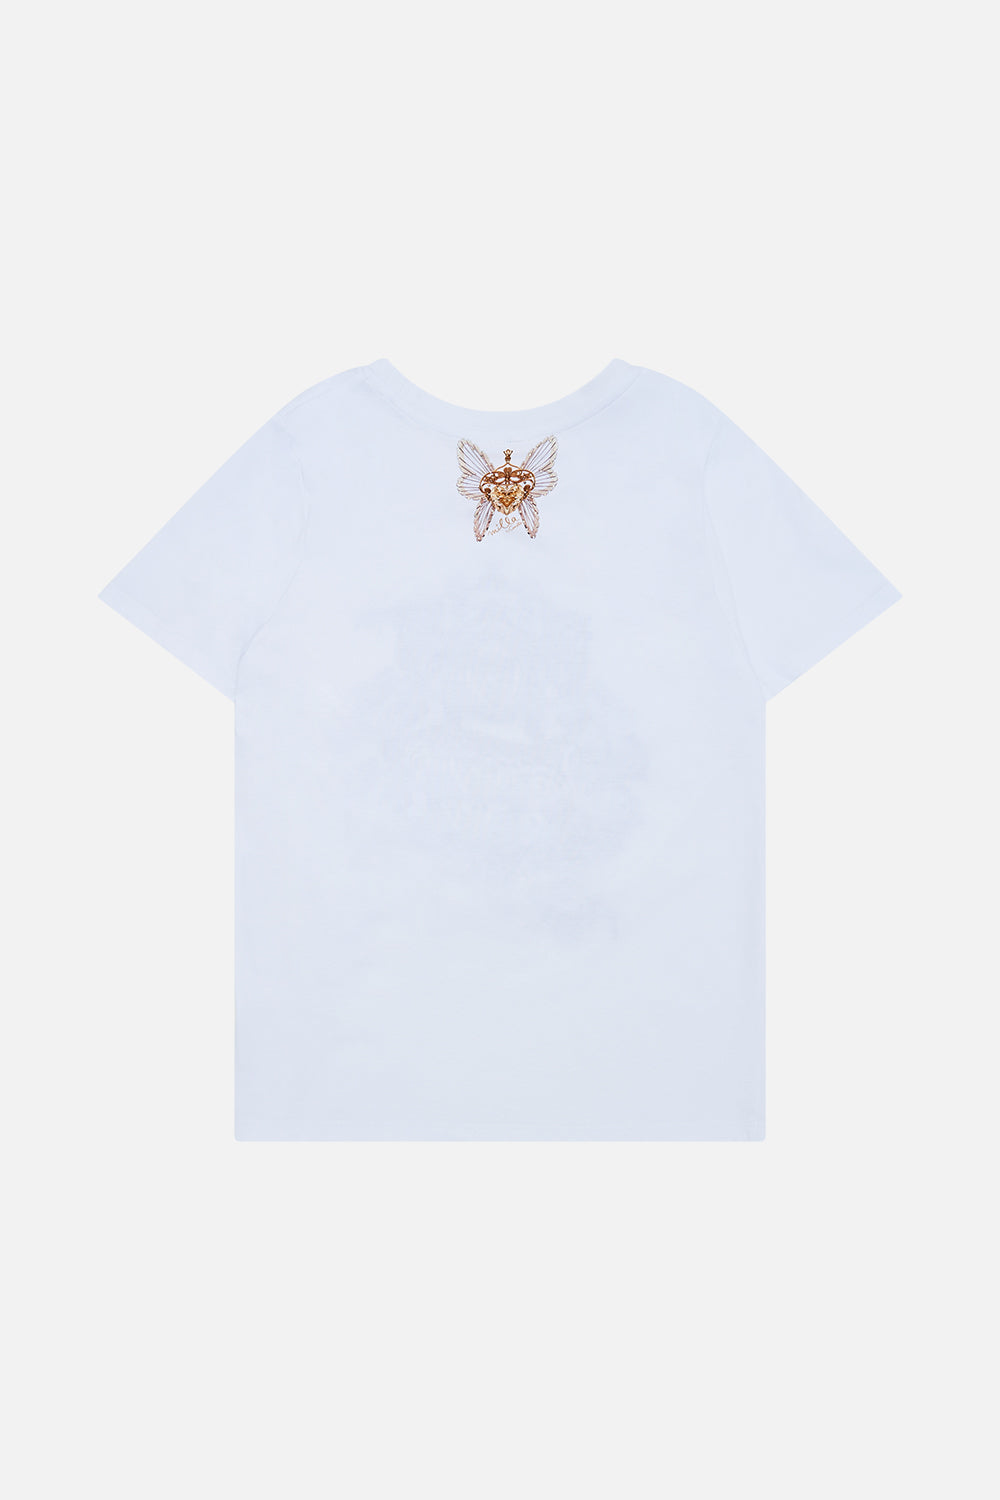 Back product view of Milla by CAMILLA kids short sleeve t shirt in Glaze and Graze print